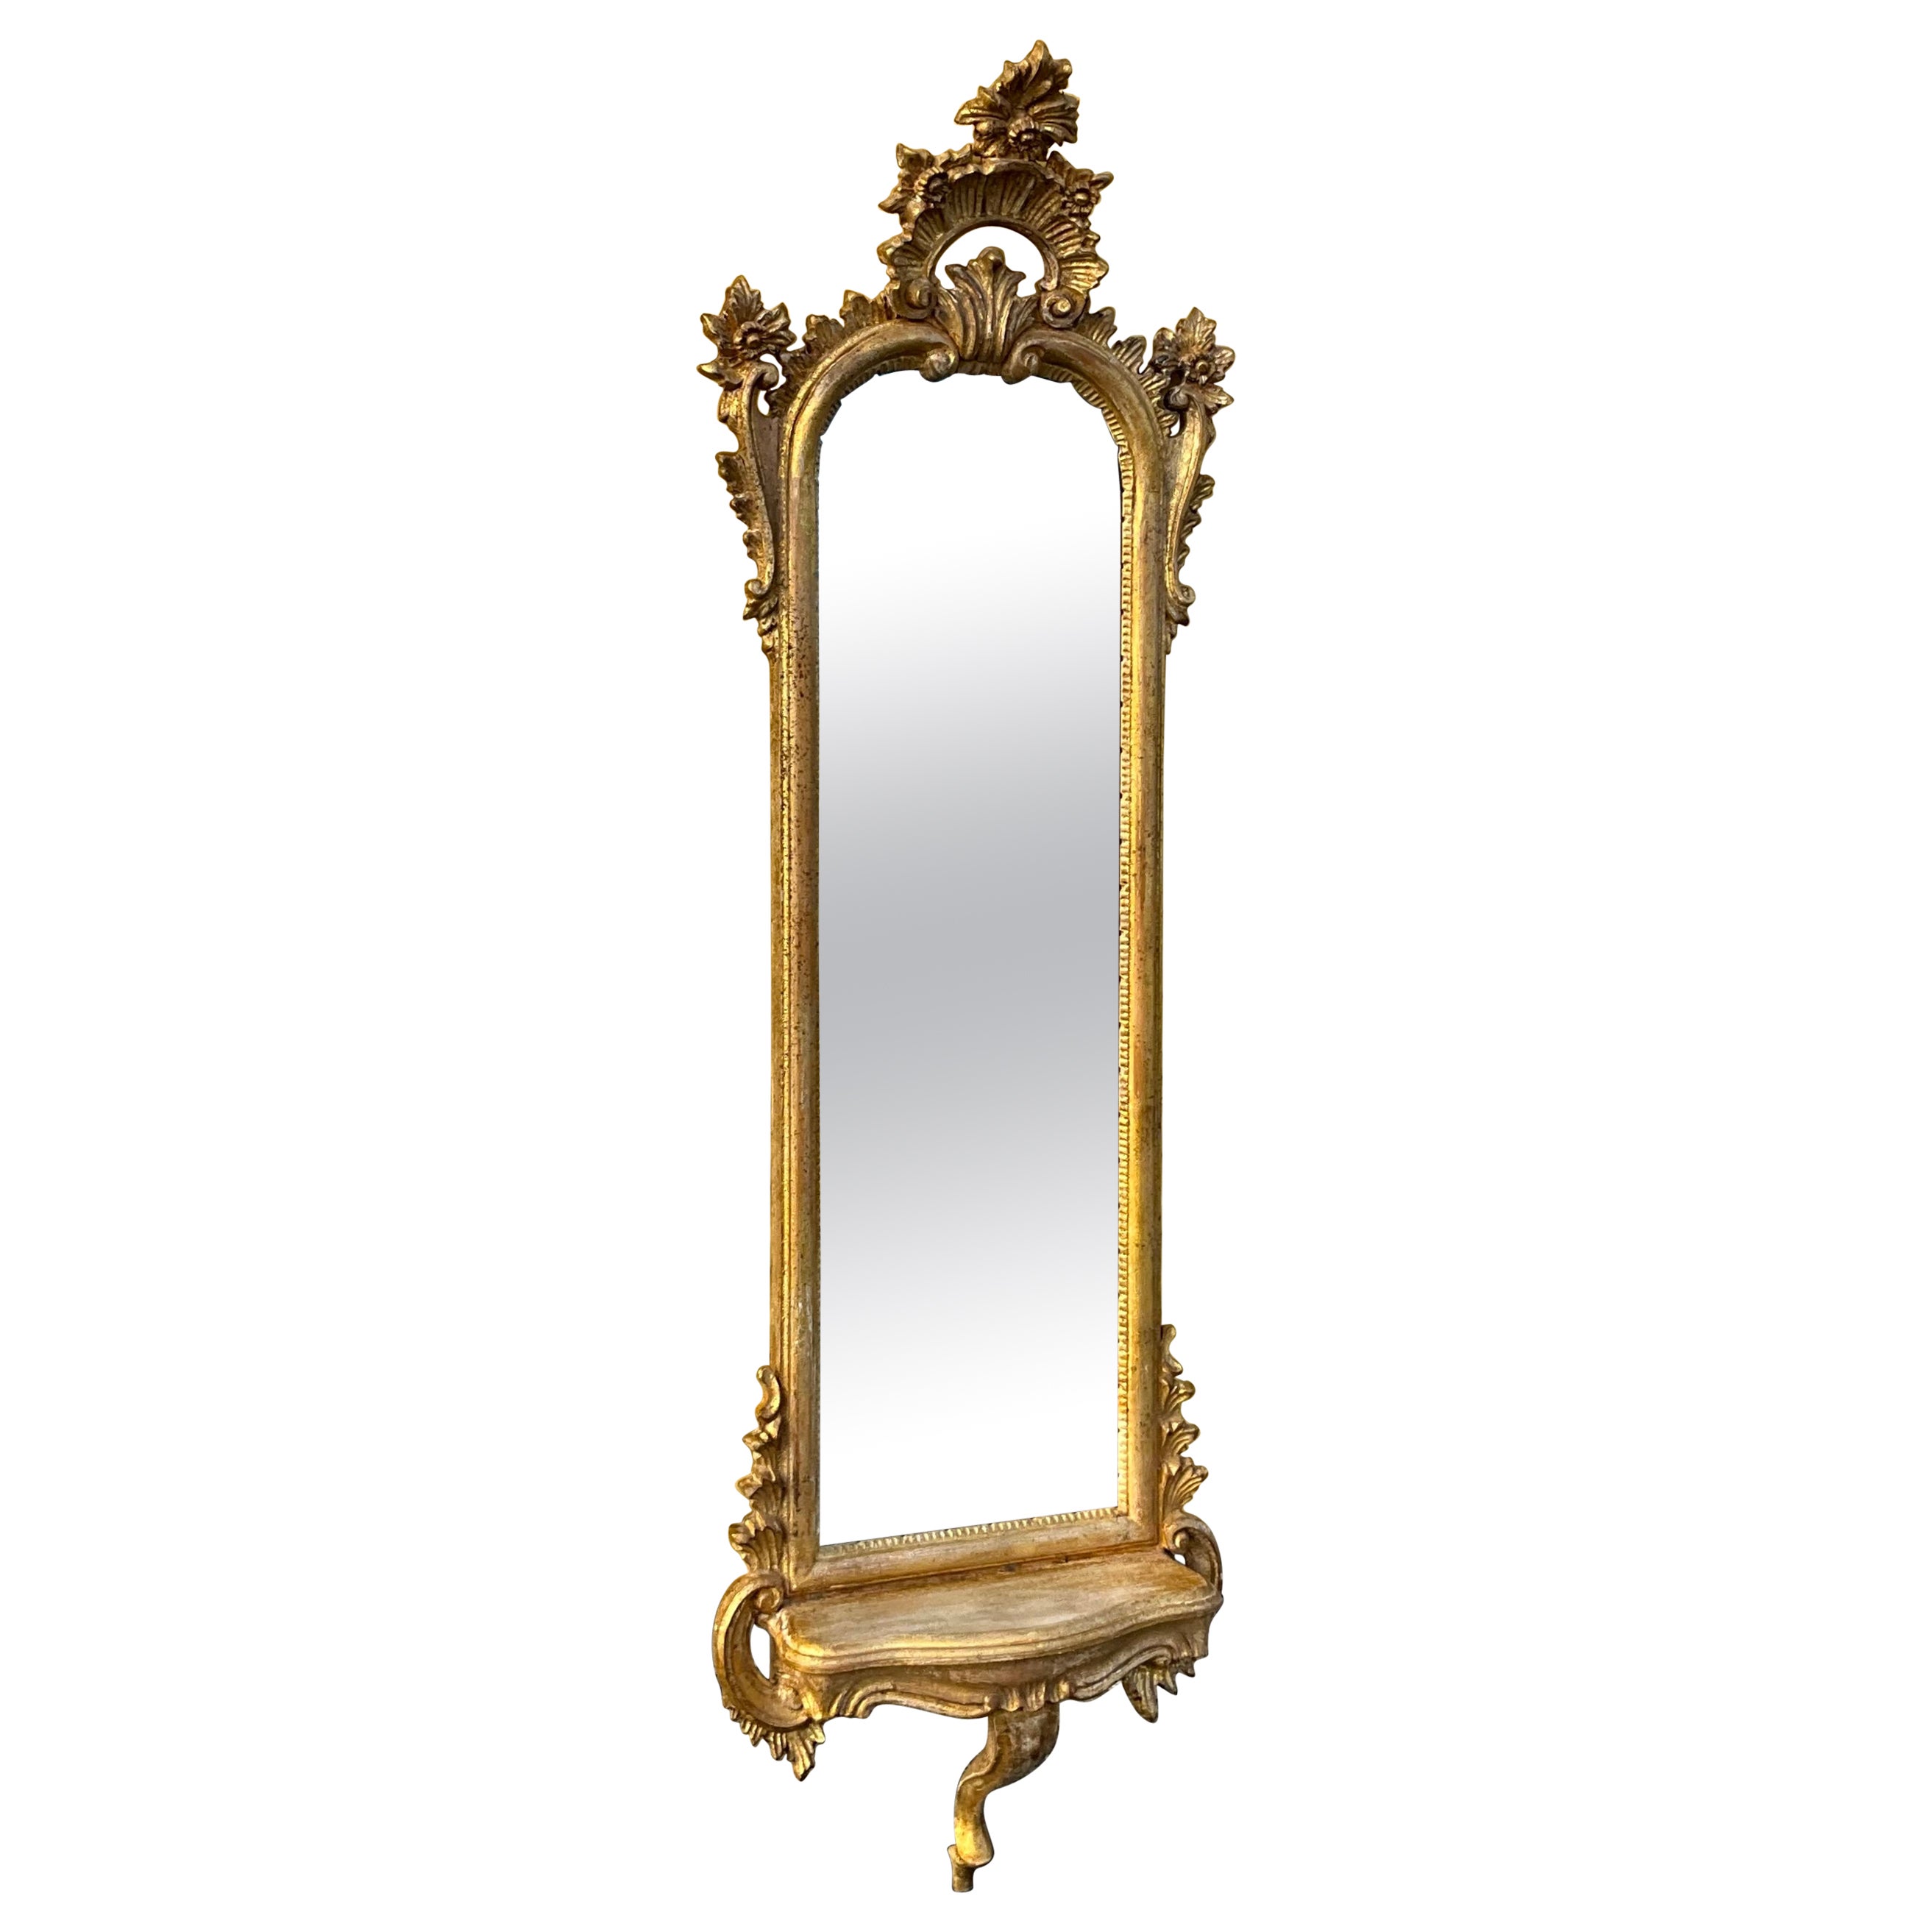 Italian Rococo Style Carved Giltwood Mirror - Self / Wall Bracket By La Barge 